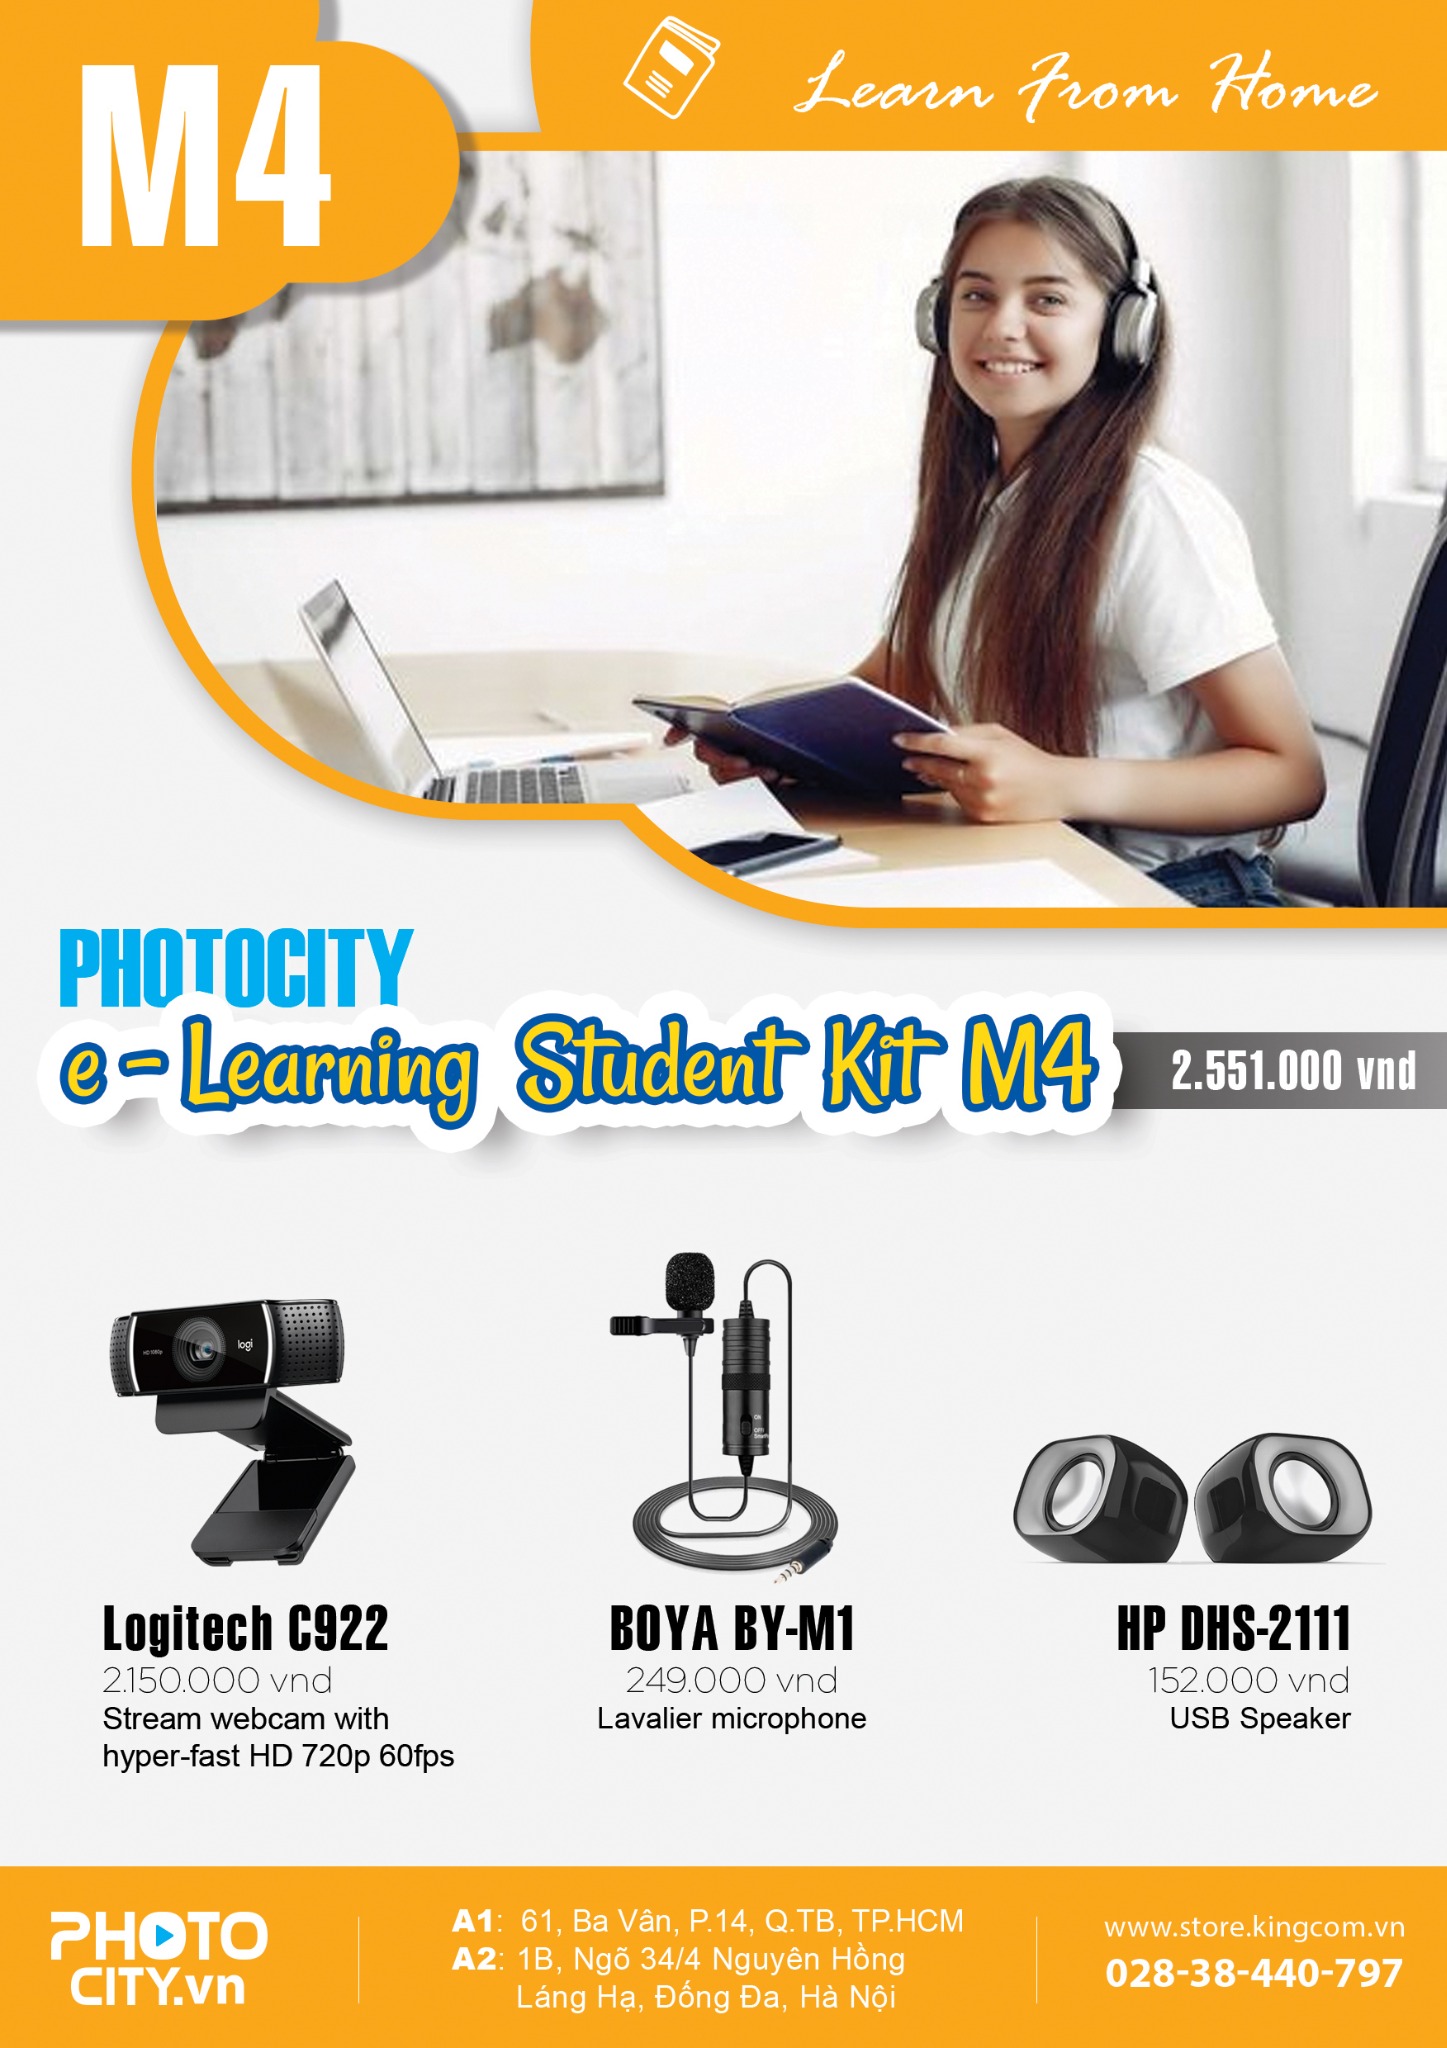 PhotoCity e -learning Student Kit M4 (Bộ dụng cụ học online)